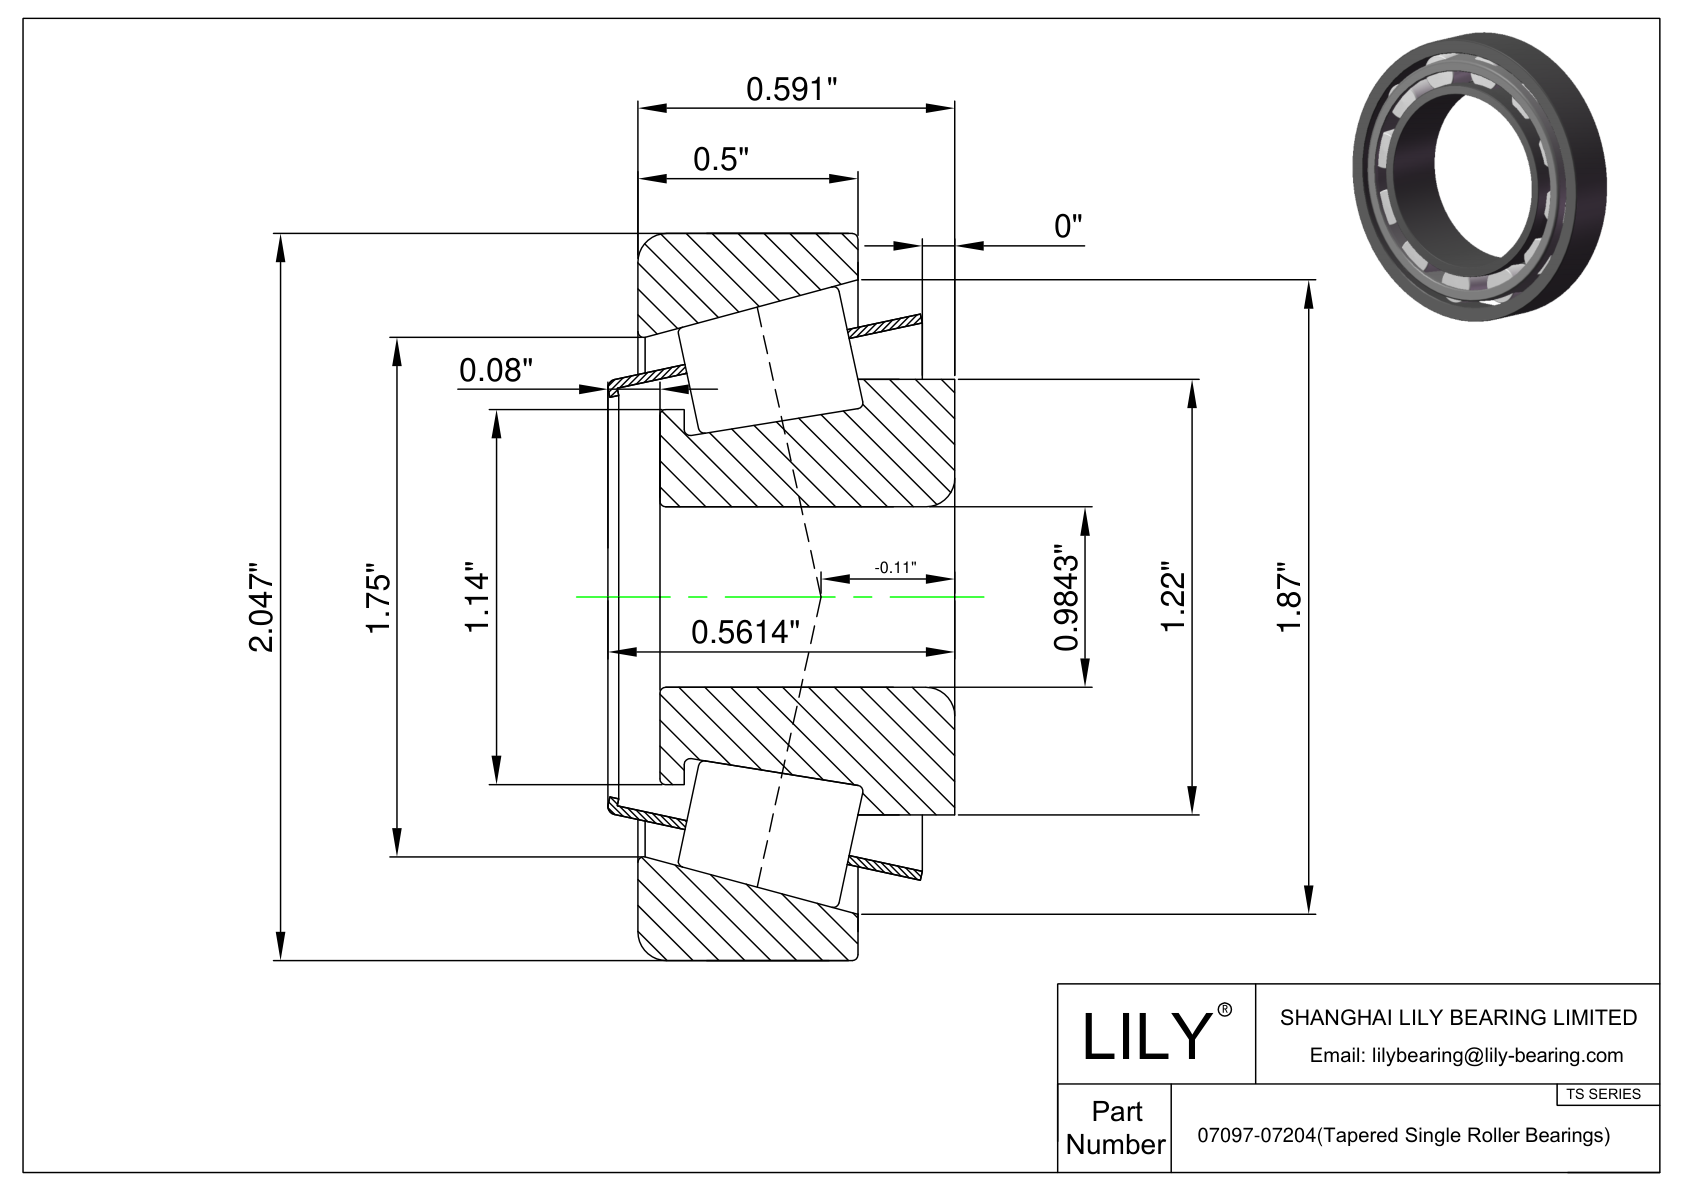 07097-07196 TS (Tapered Single Roller Bearings) (Imperial) cad drawing